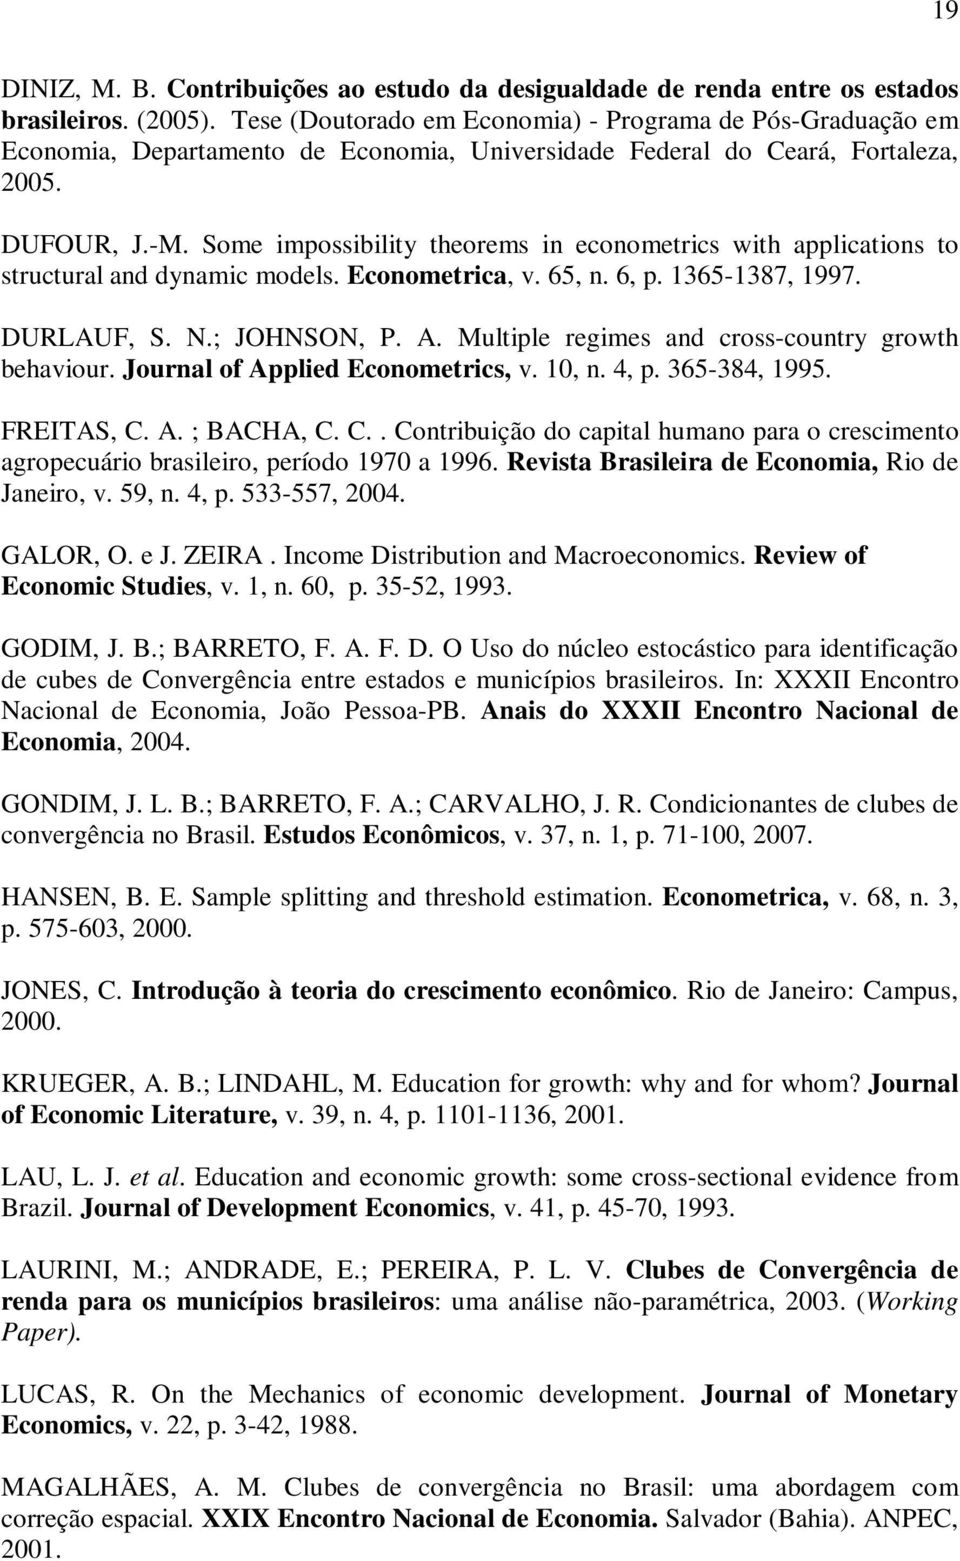 Some mpossblty theorems n econometrcs wth applcatons to structural and dynamc models. Econometrca, v. 65, n. 6, p. 1365-1387, 1997. DURLAUF, S. N.; JOHNSON, P. A.